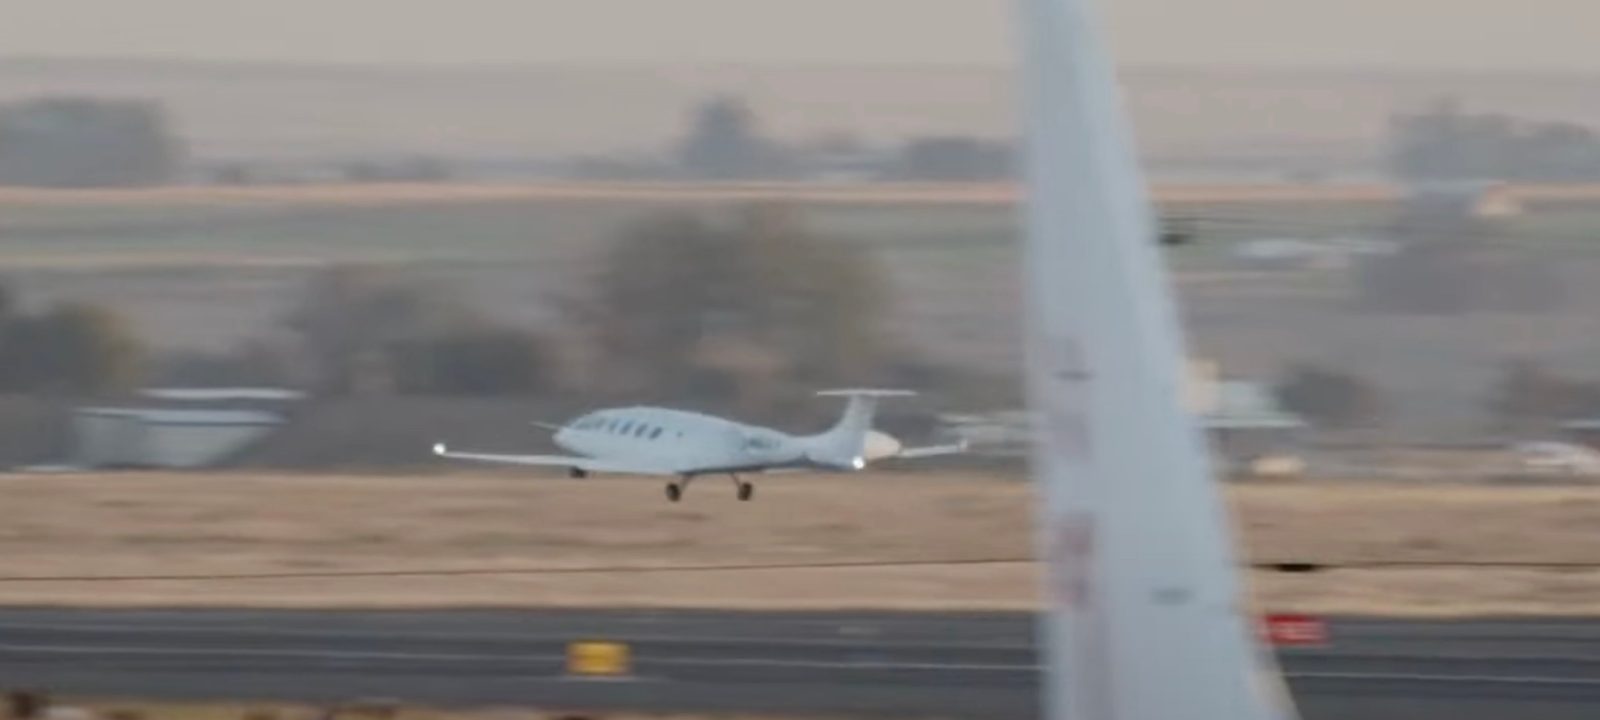 Eviation Alice electric aircraft